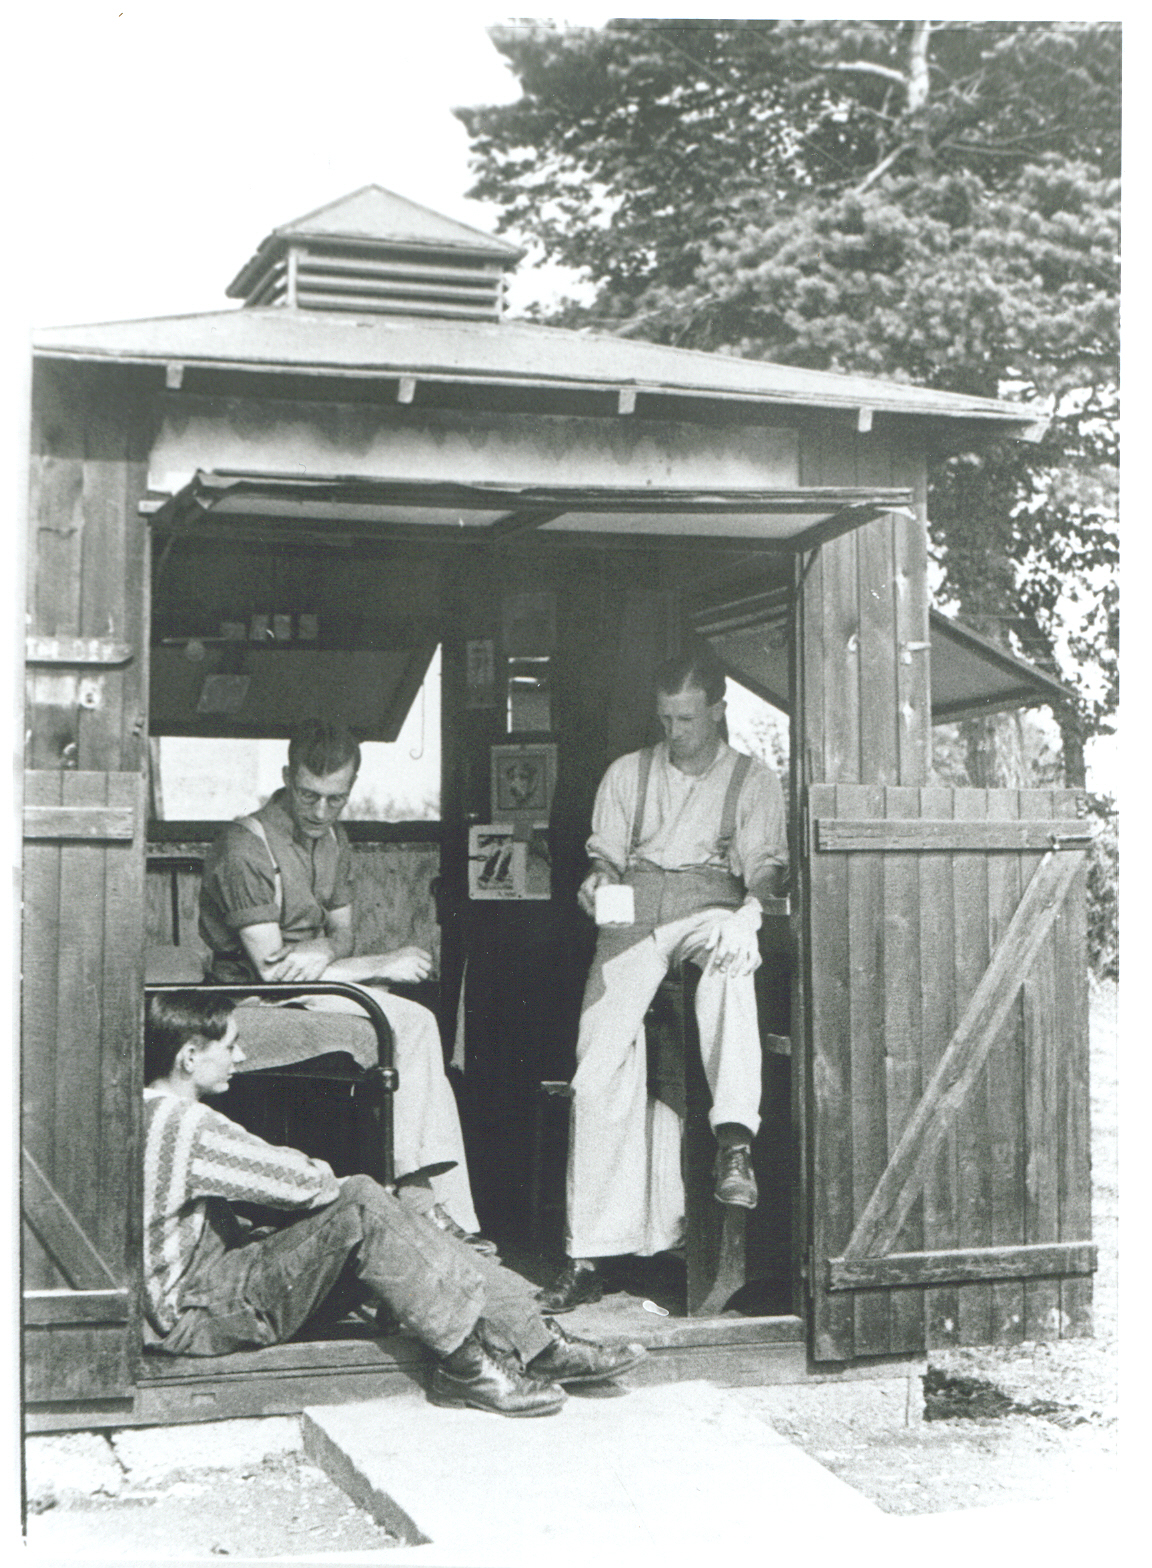 Men sitting in a shed with open windows.